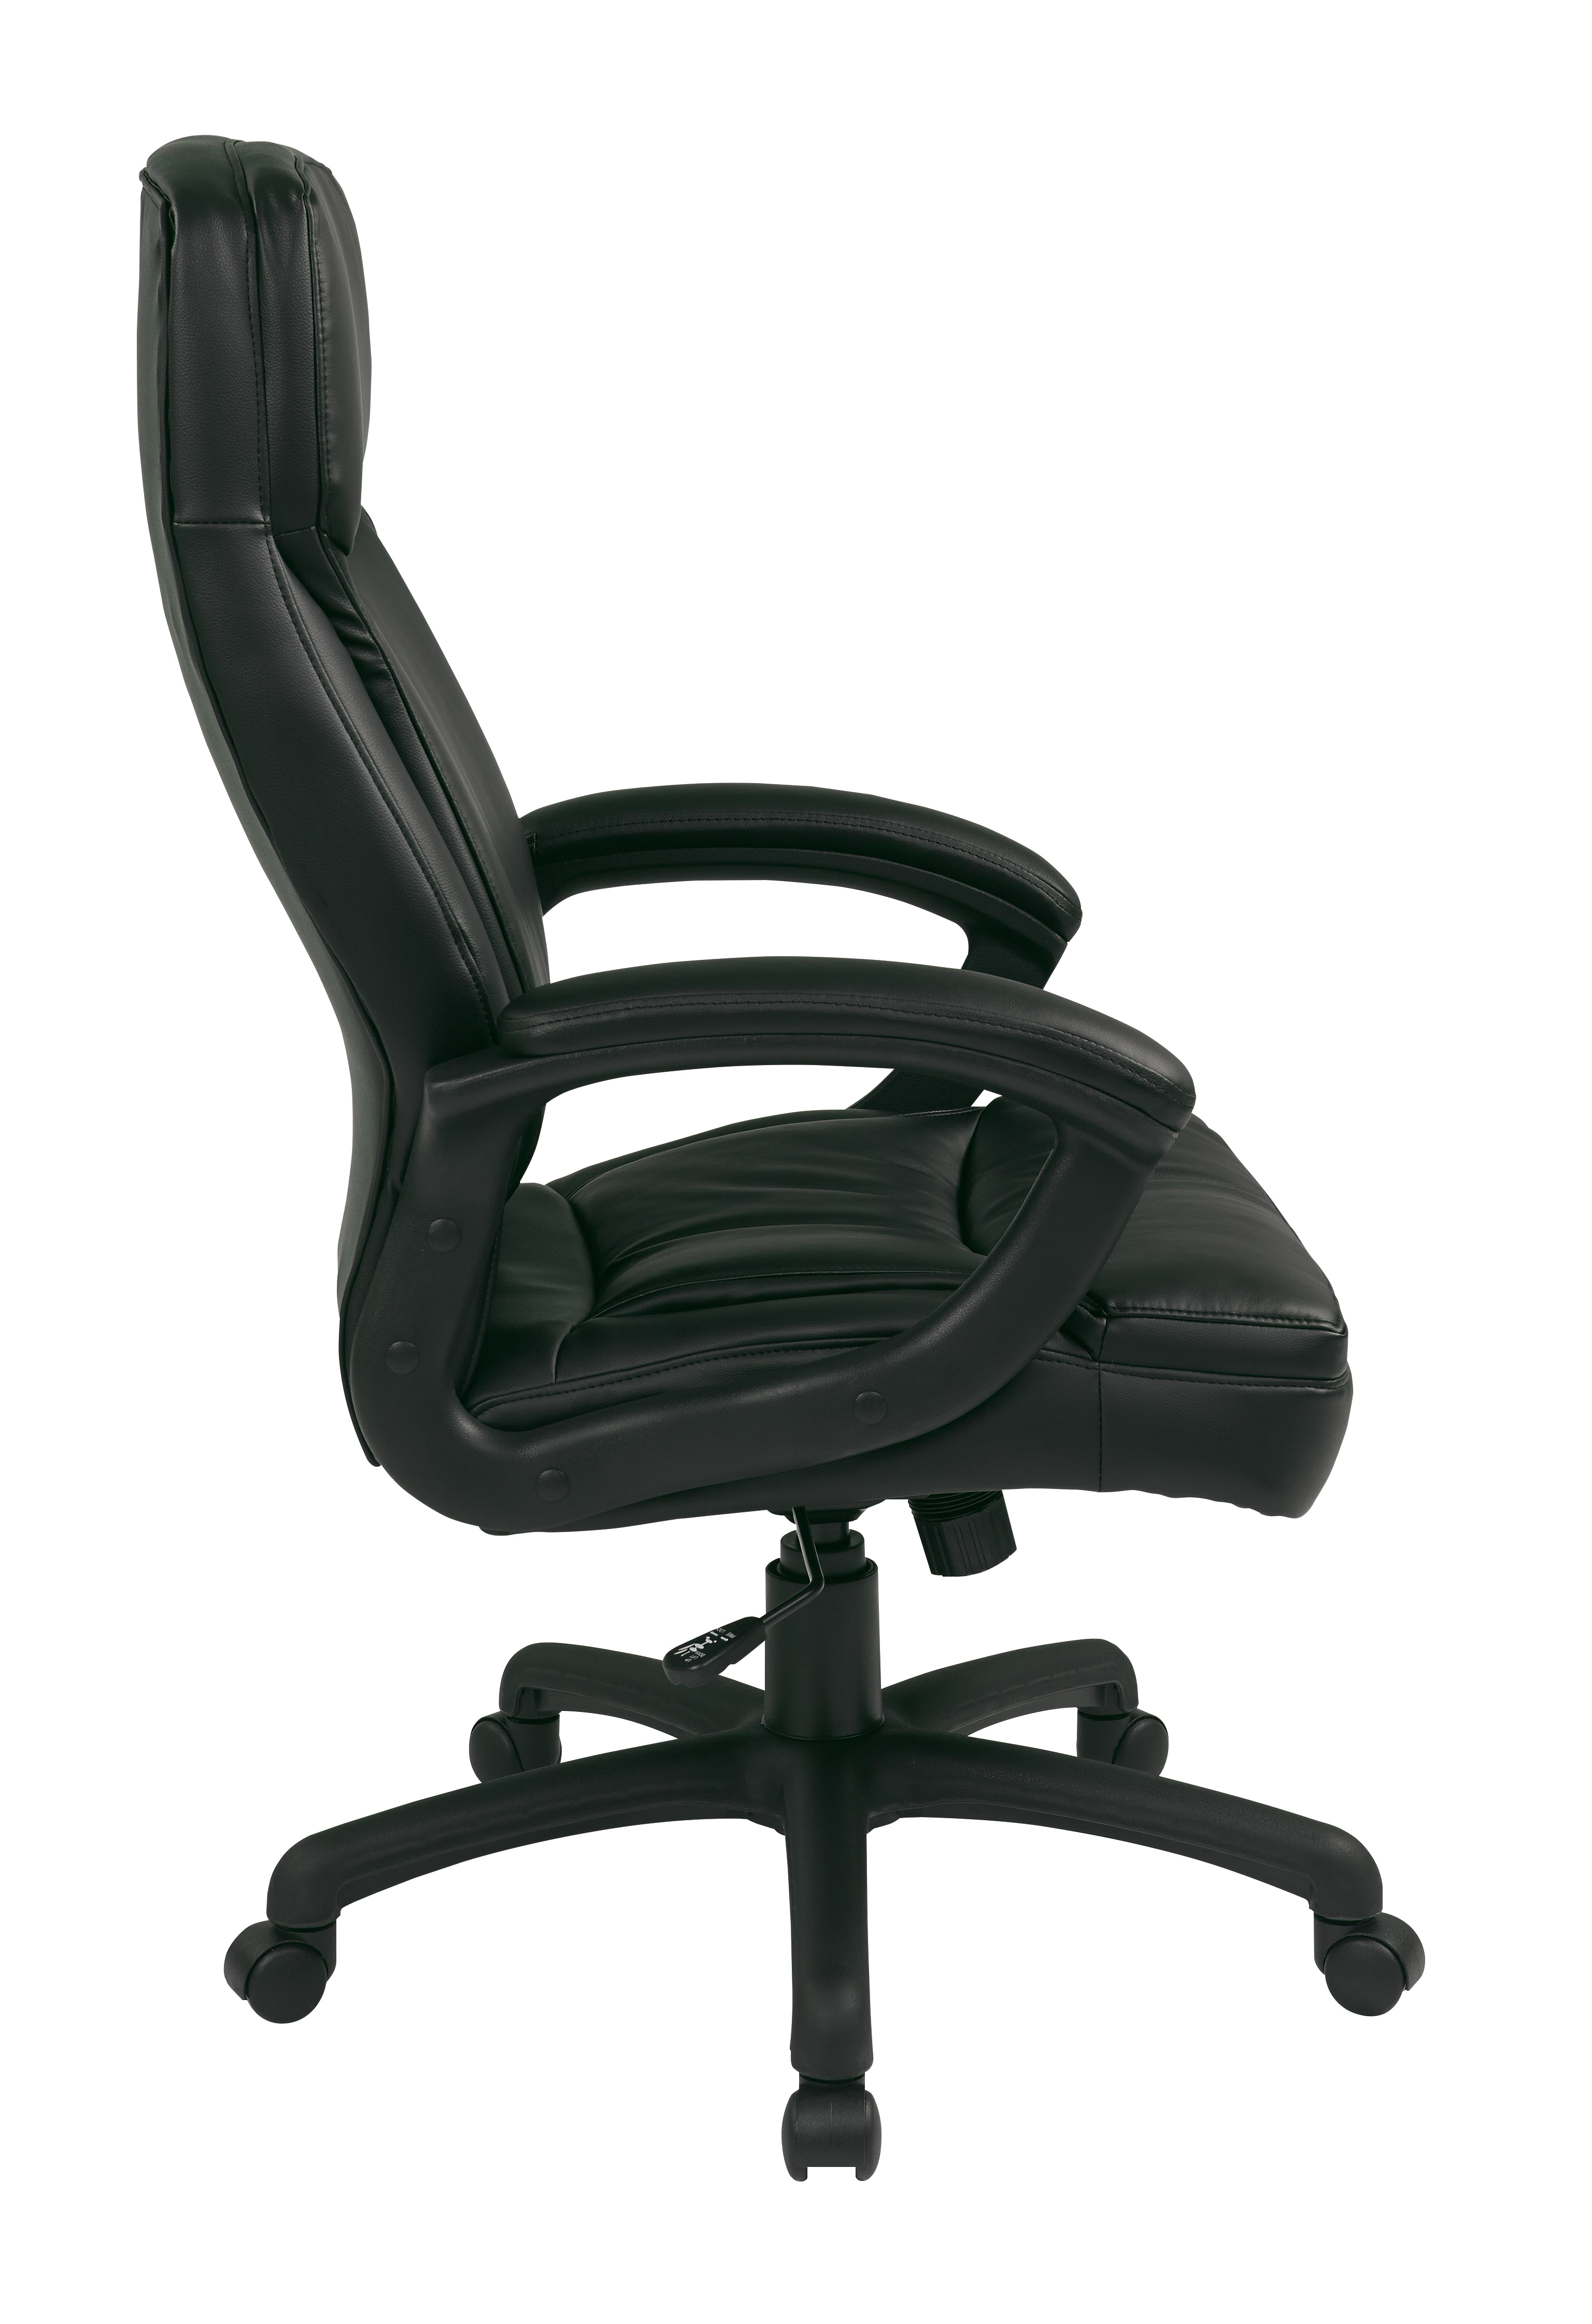 Left View: Office Star Products - High-Back Eco Leather Executive Chair - Black